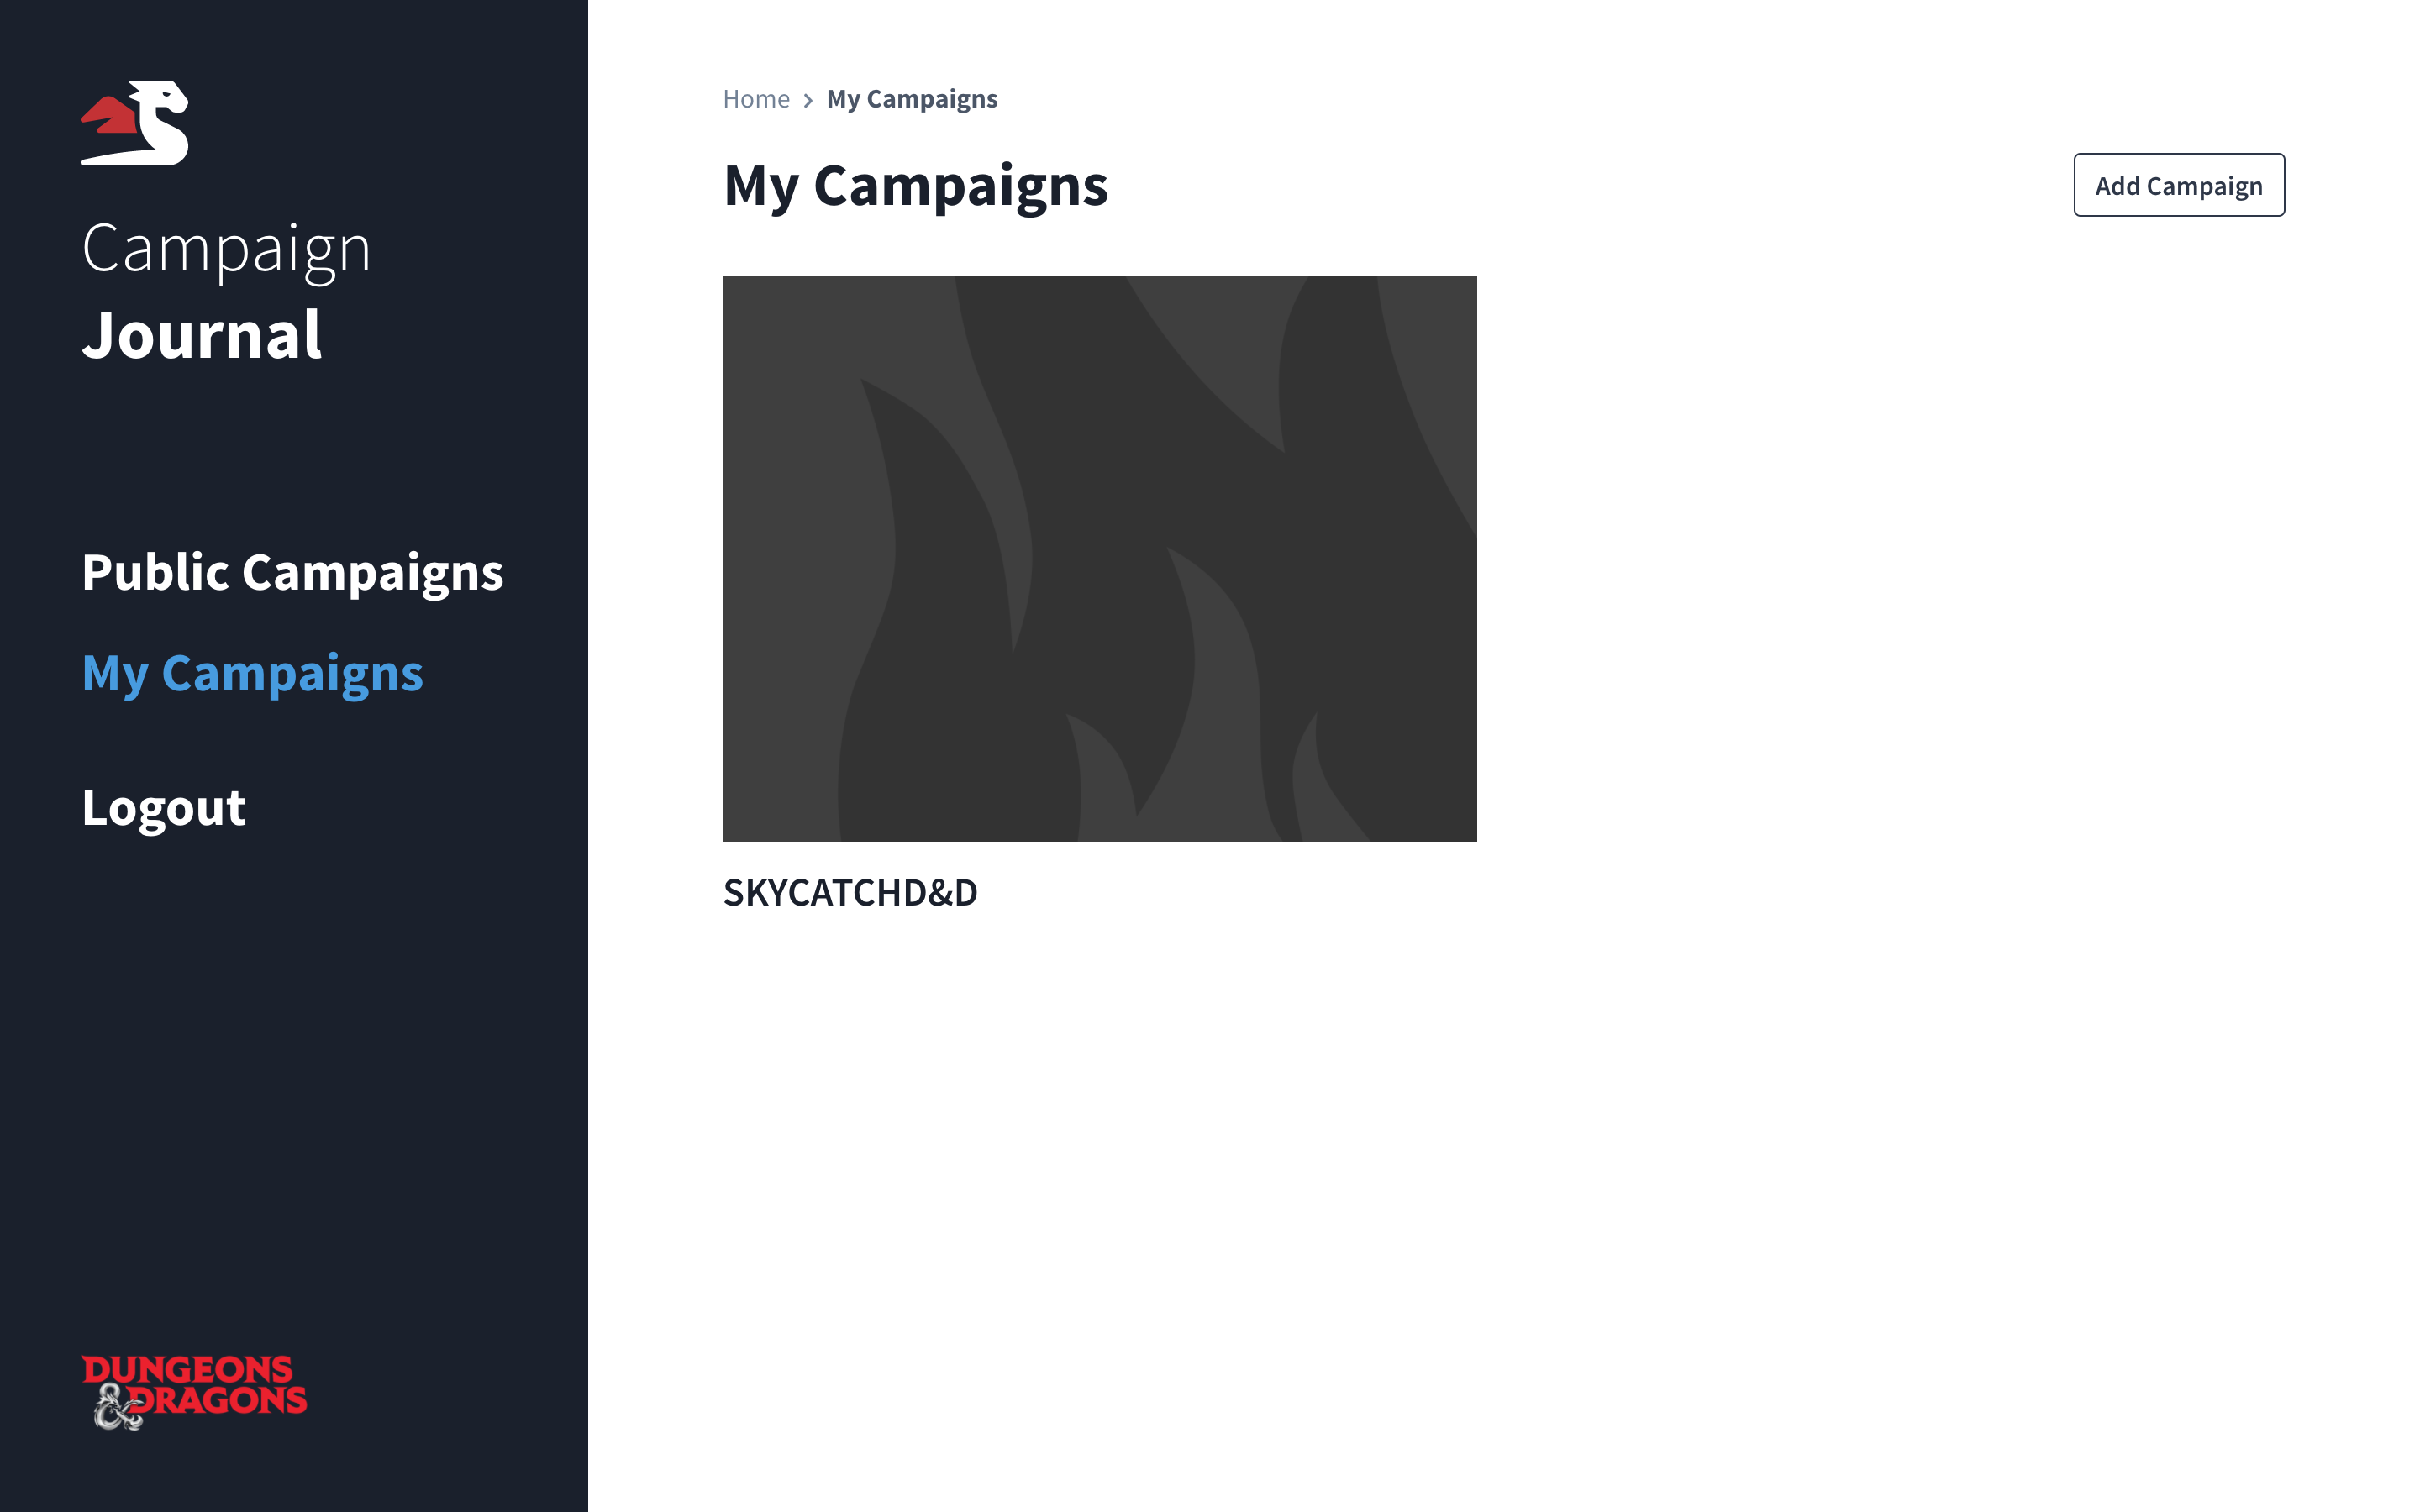 My campaigns